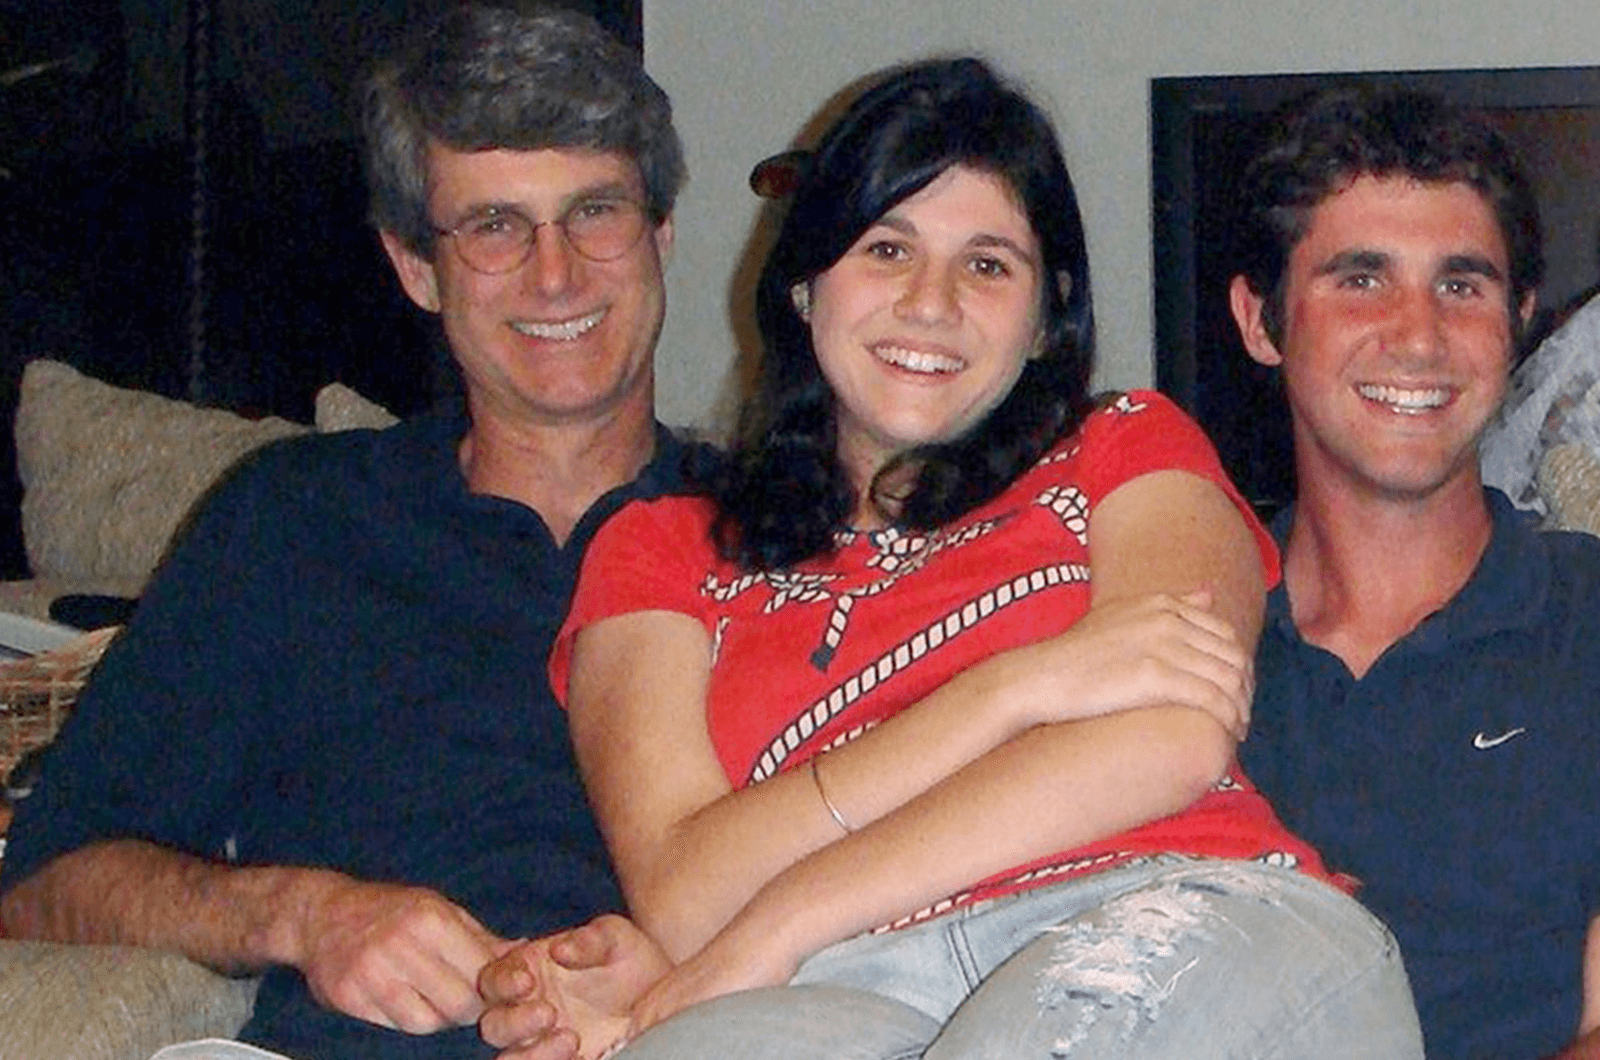 A father posing on couch with male and female adult children